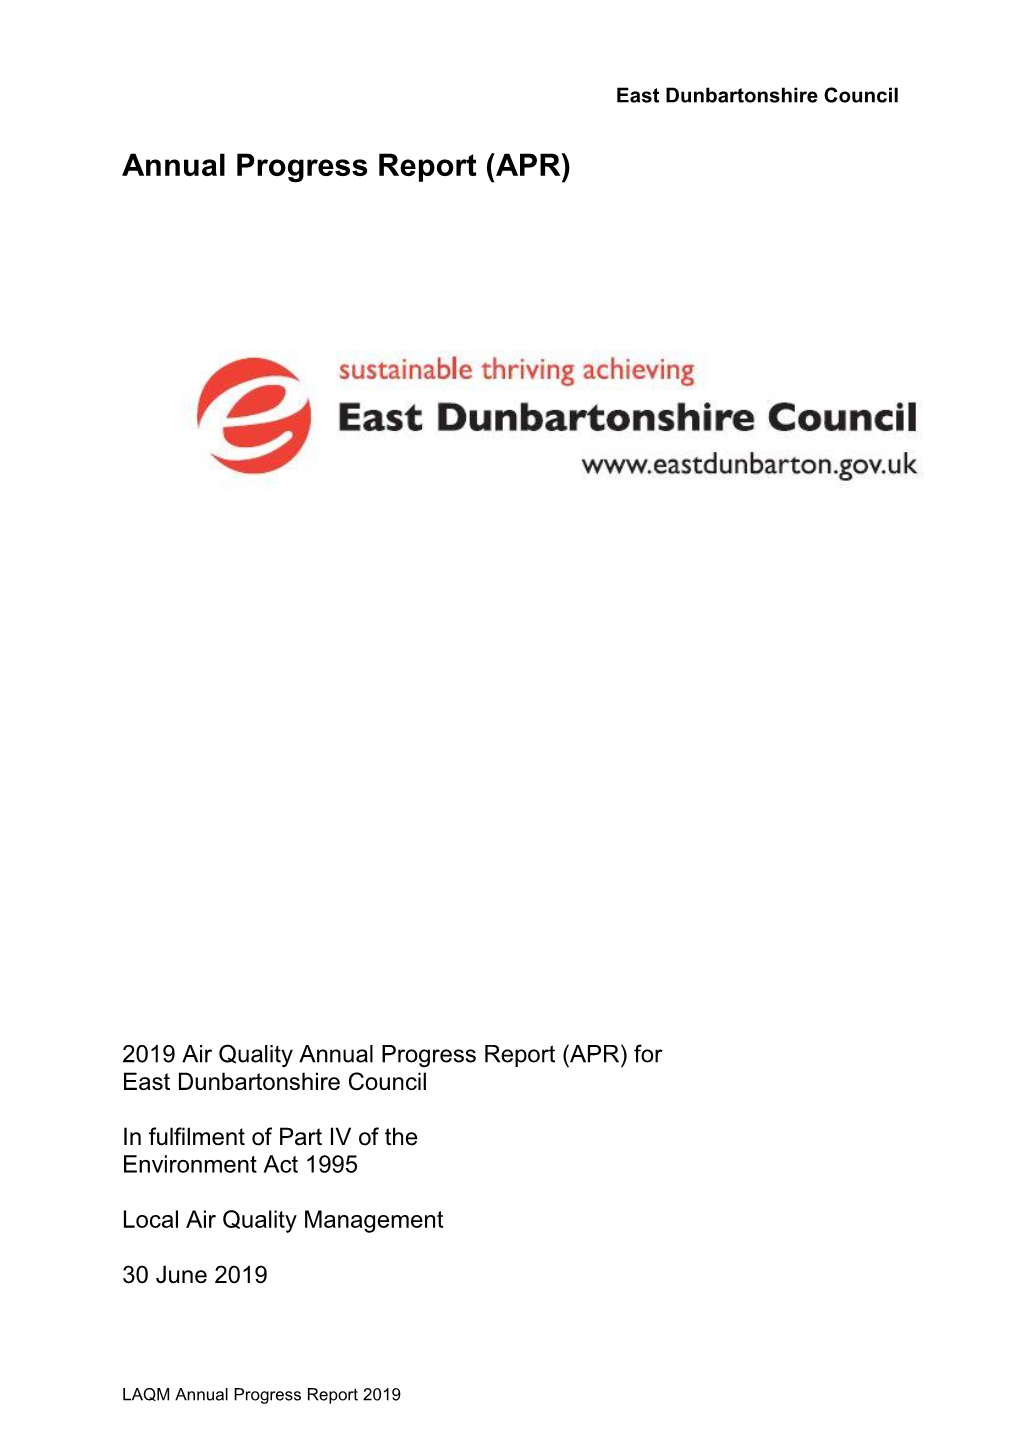 2019 Air Quality Annual Progress Report (APR) for East Dunbartonshire Council